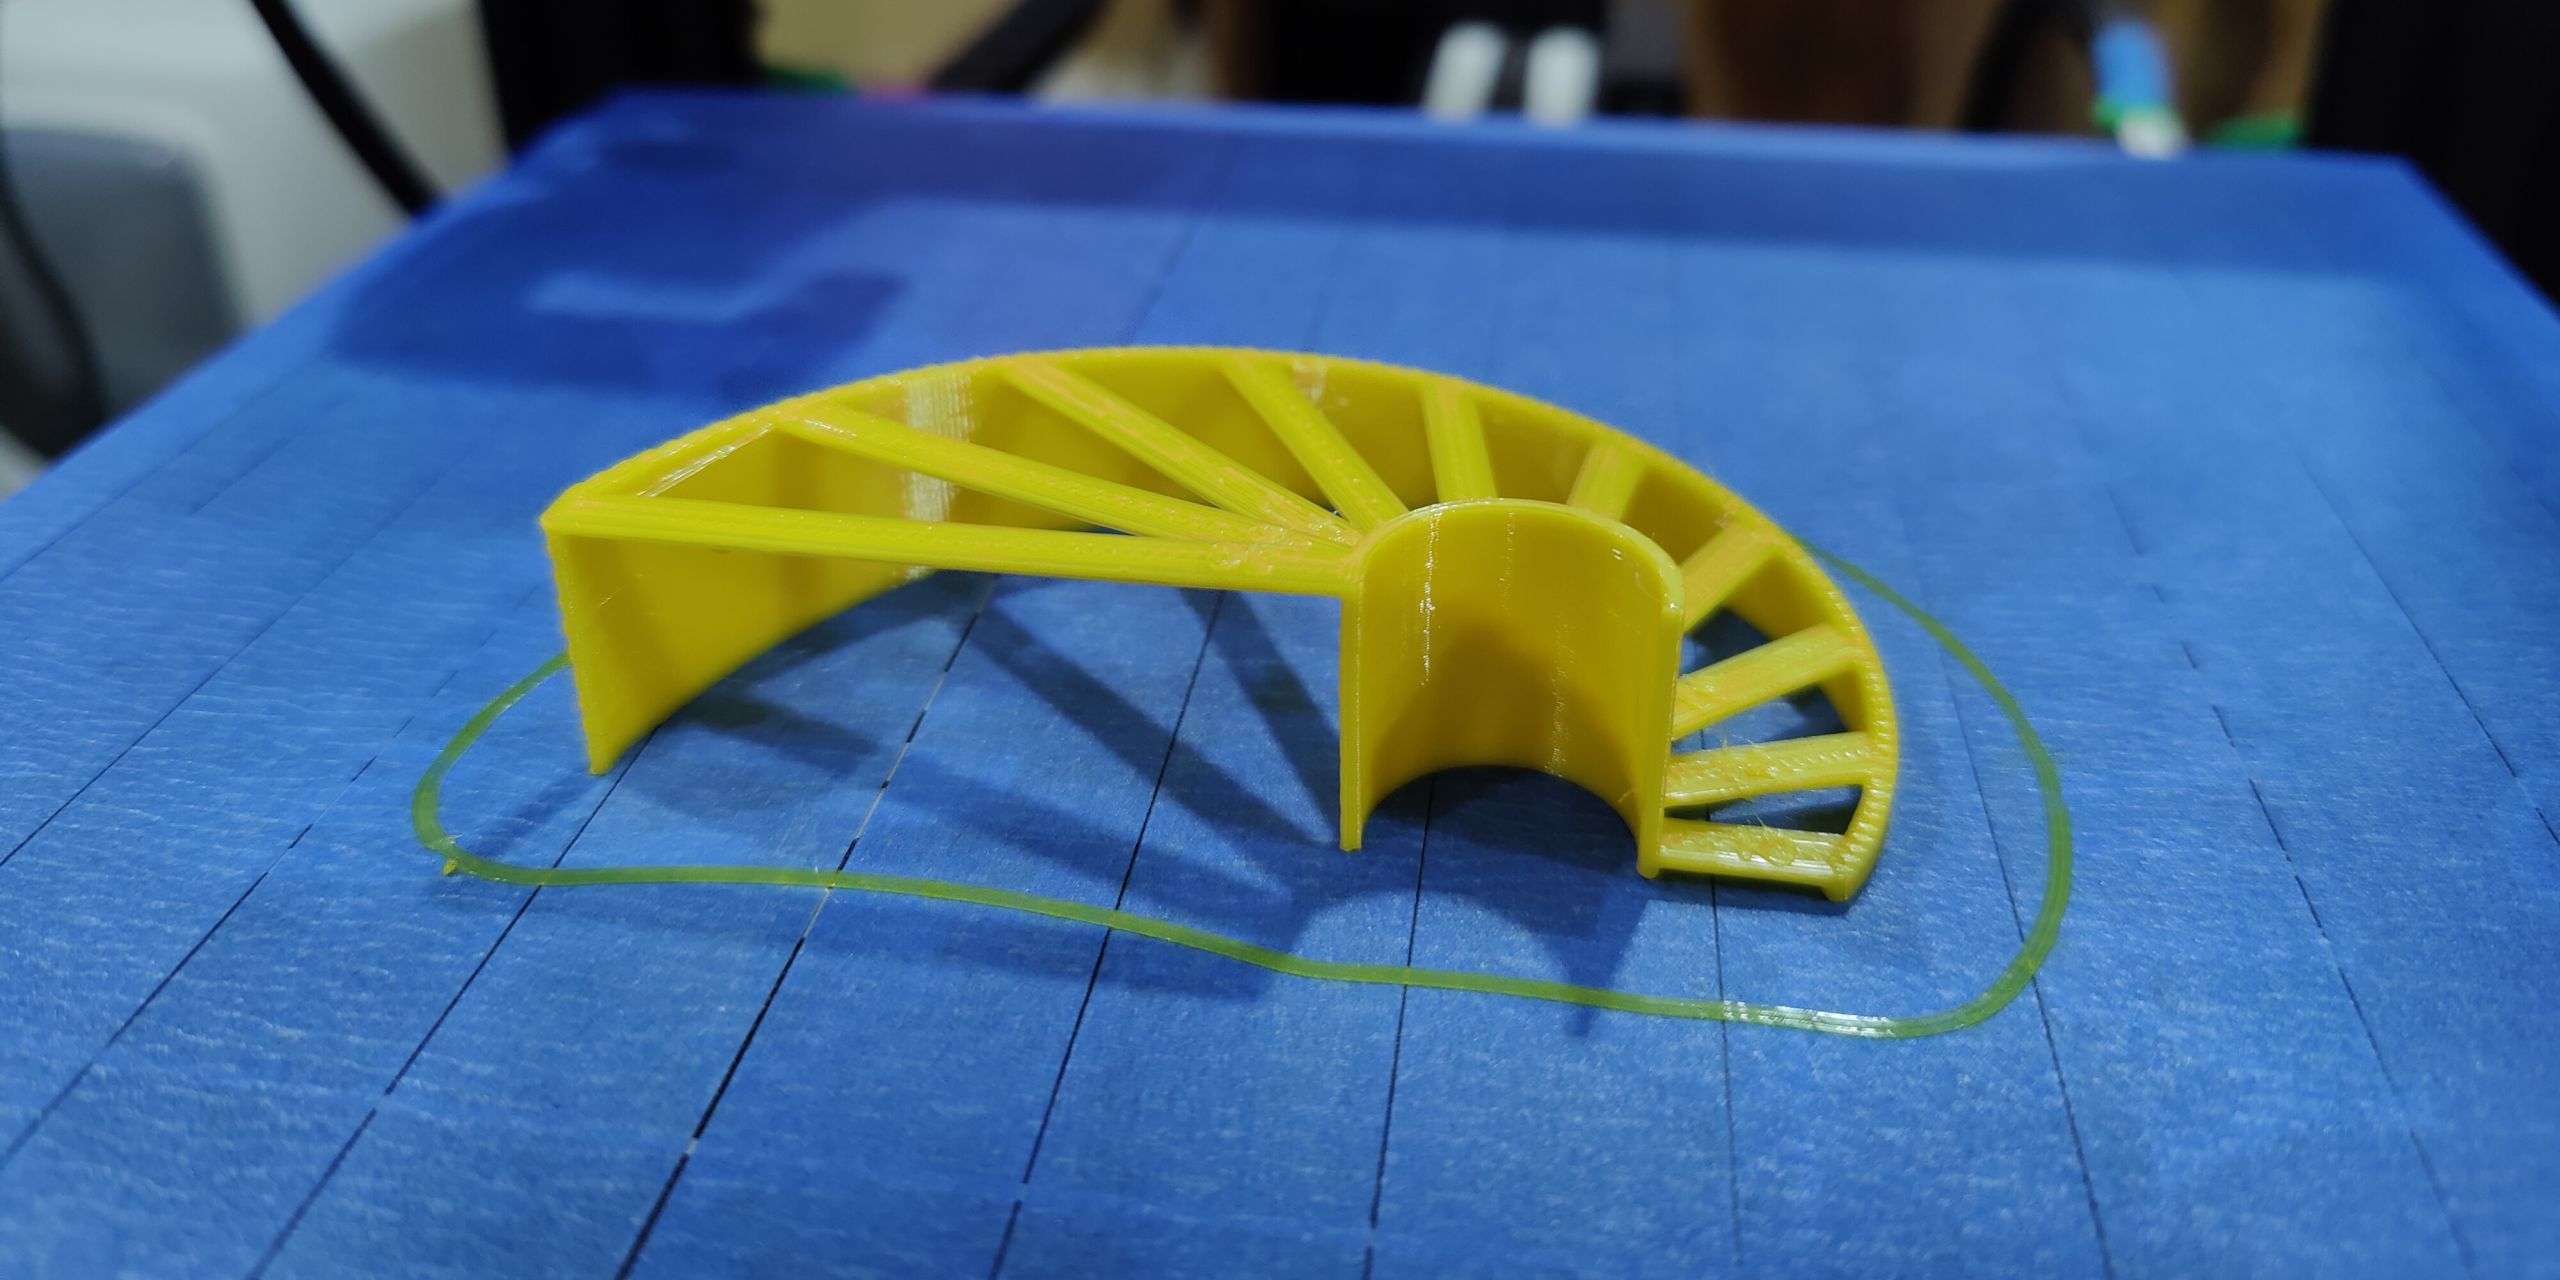 Painter's tape 3D printing surface